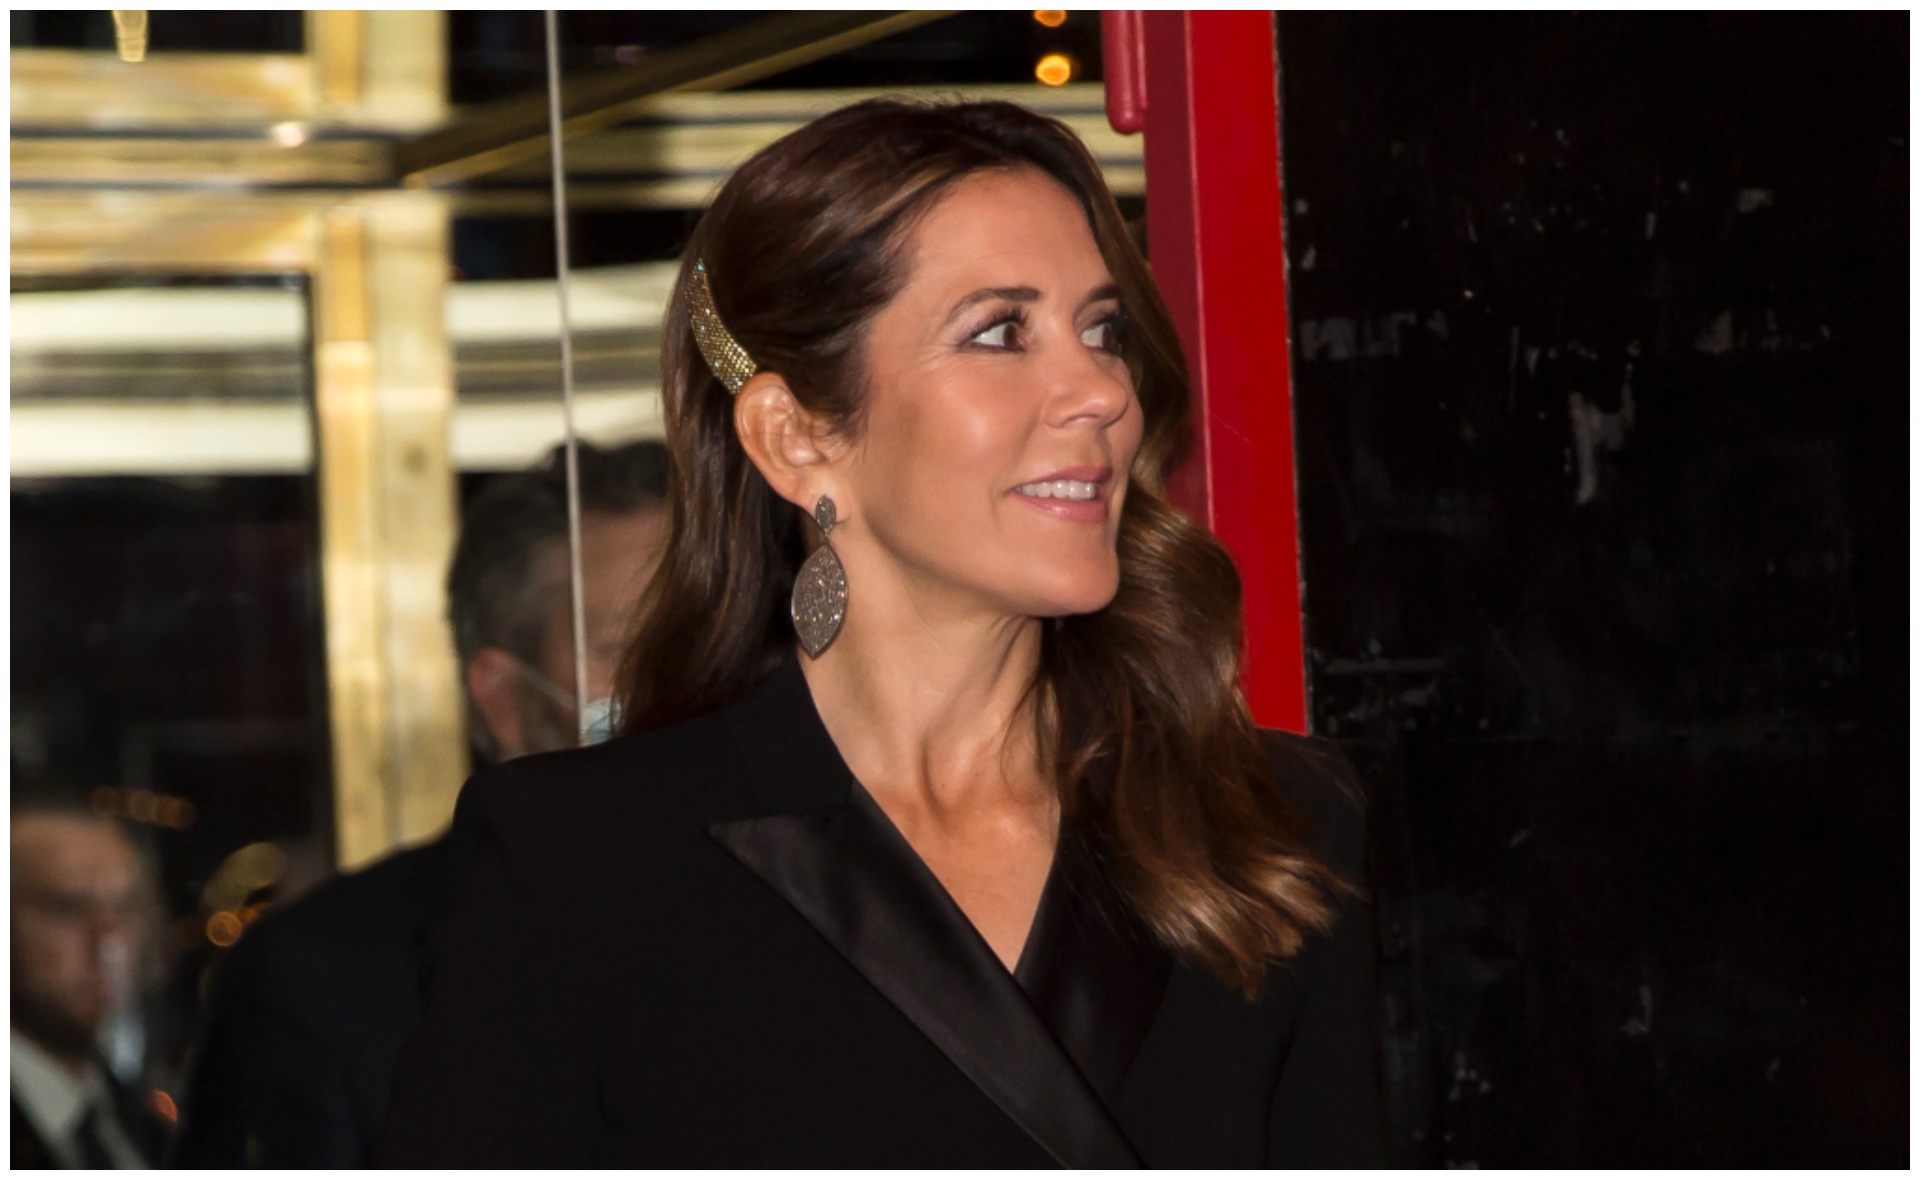 Crown Princess Mary just wore the pant suit of our dreams – so we’ll just let the photos convince you of your next purchase